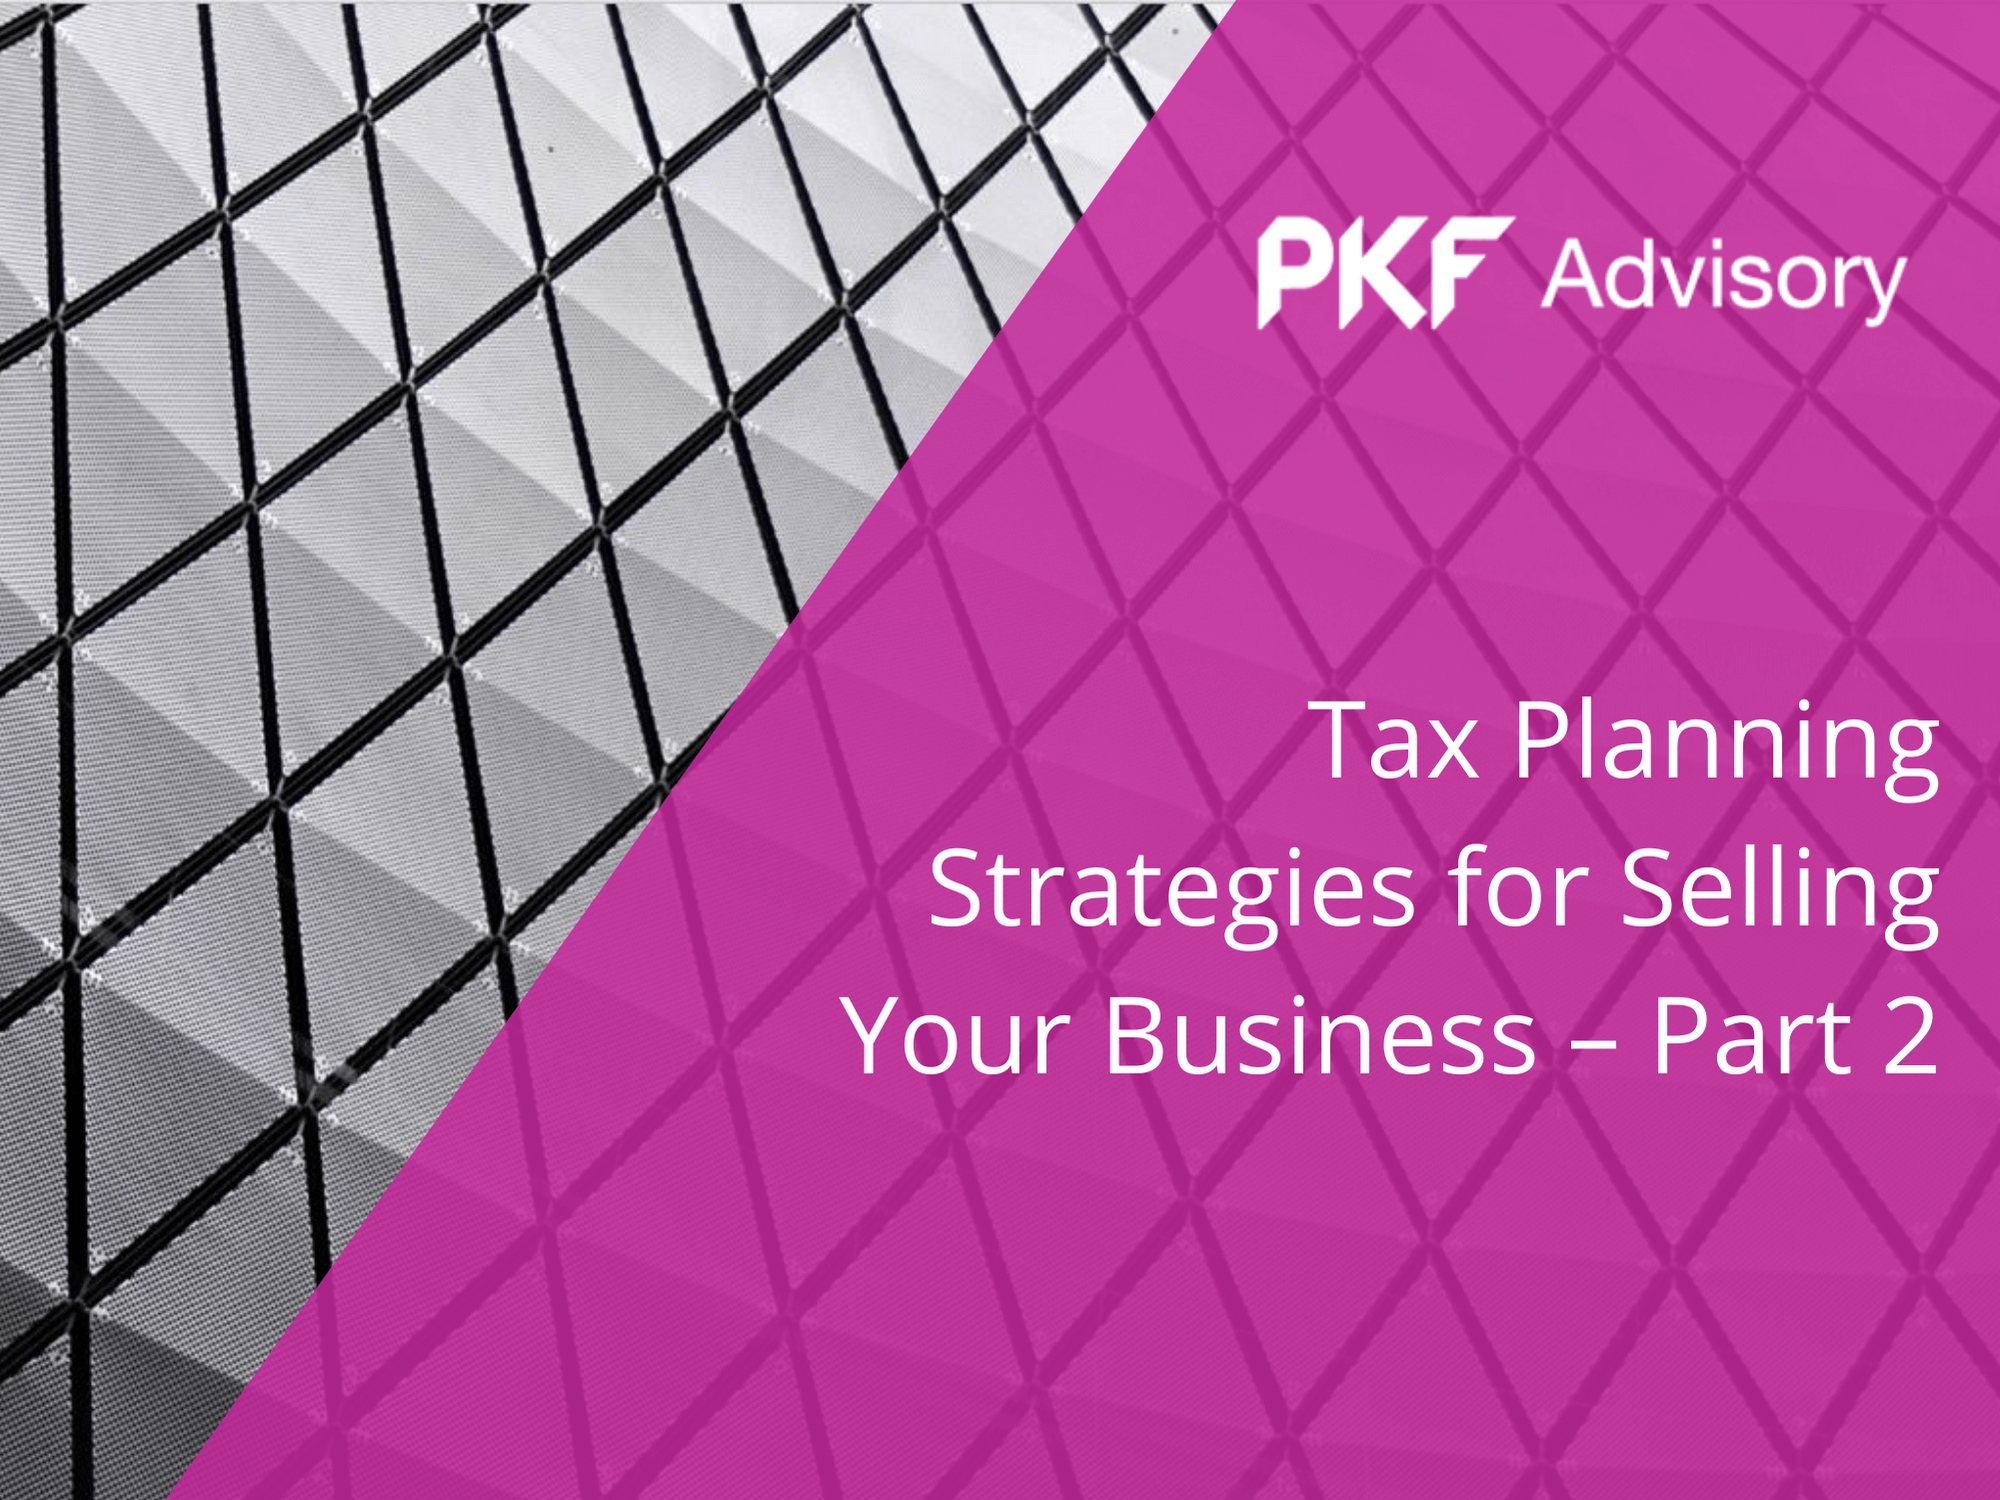 Tax Planning Strategies for Selling Your Business - Part 2